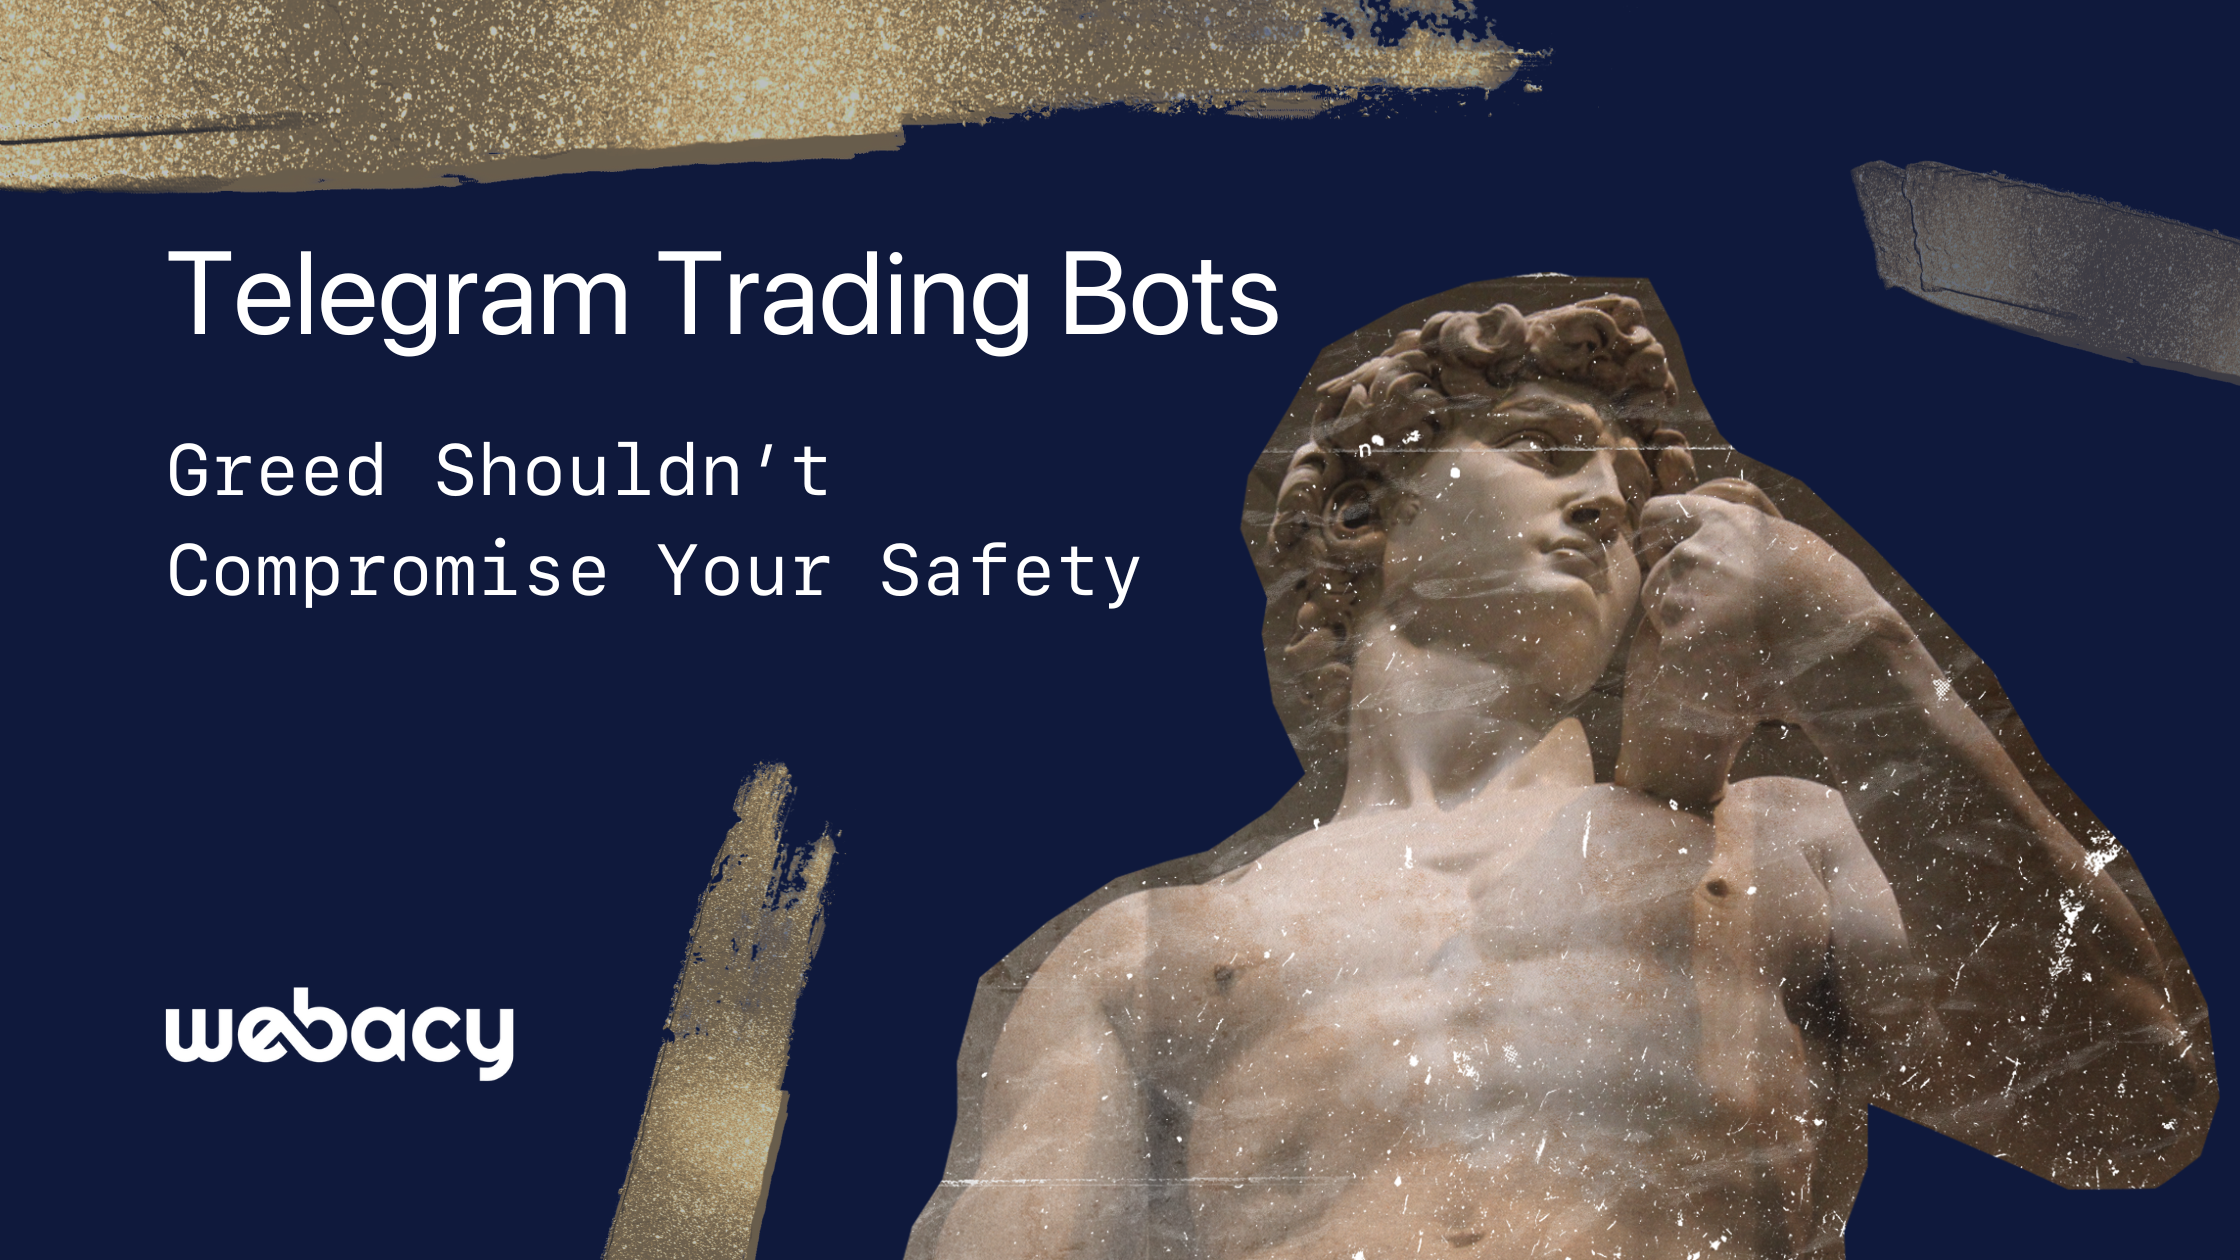 Telegram Trading Bots: Greed Shouldn’t Compromise Your Safety